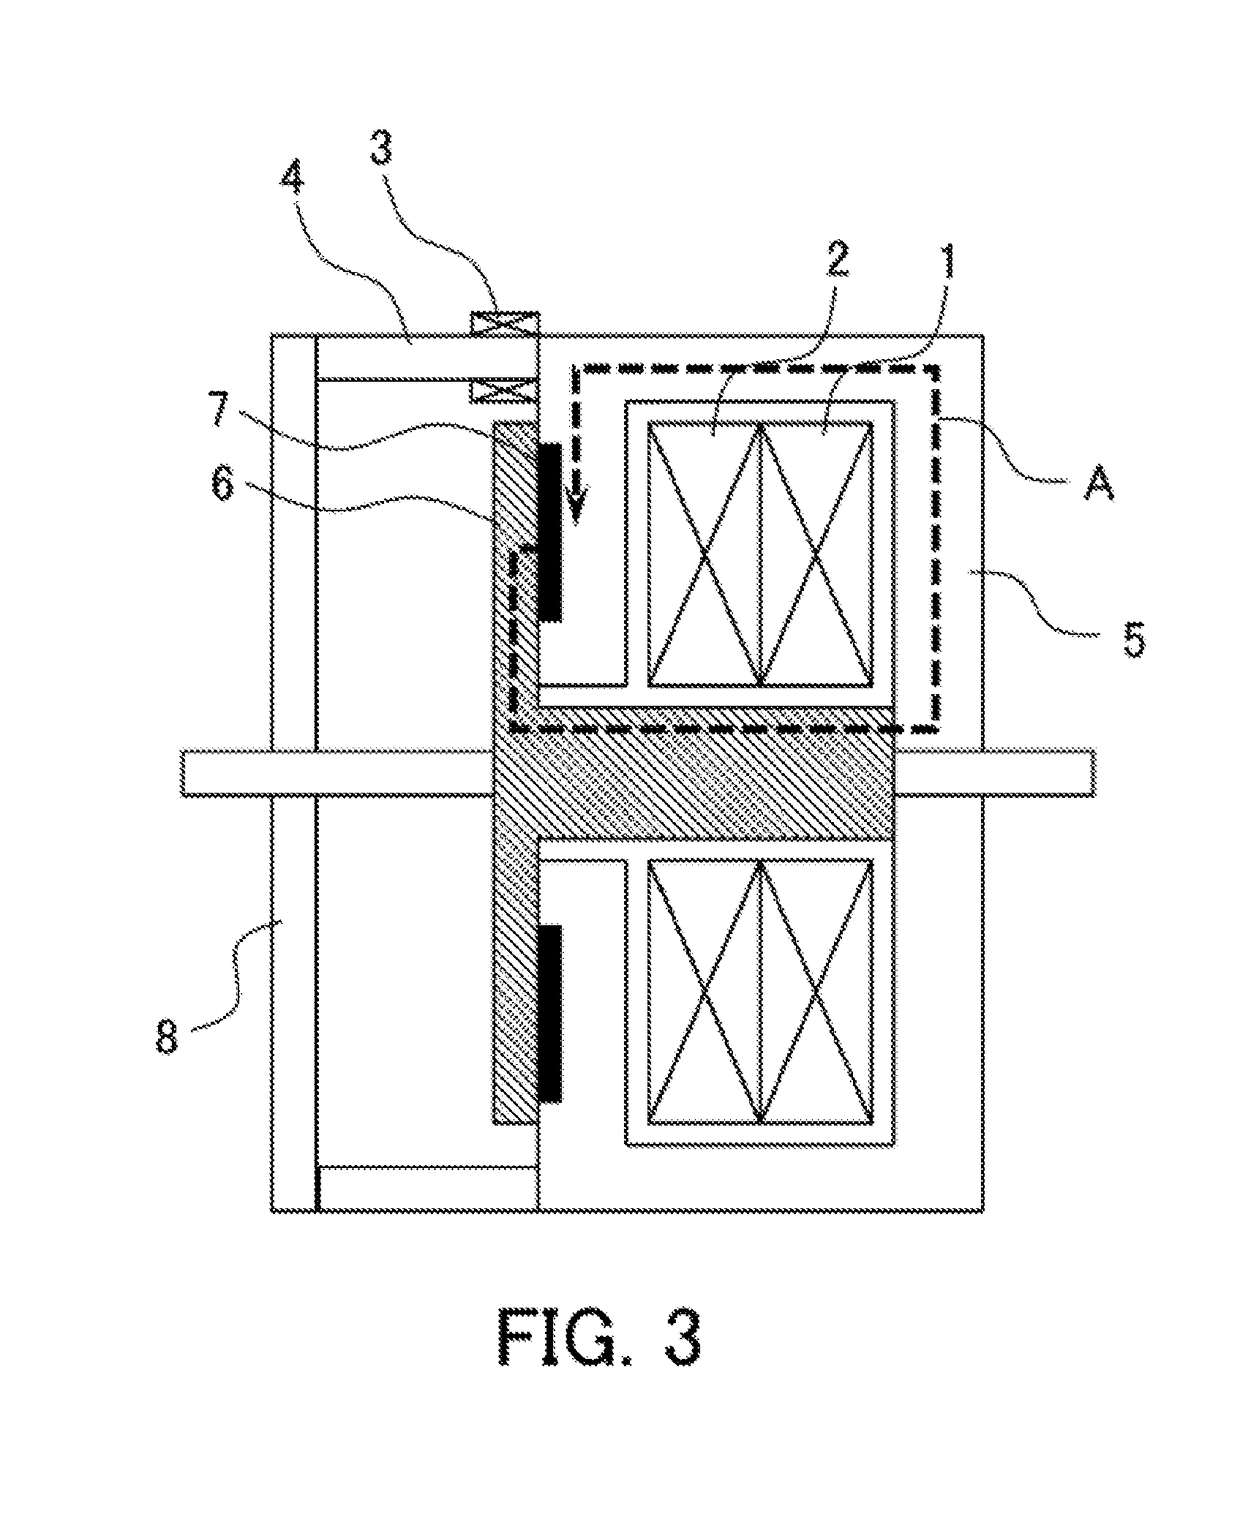 Electromagnetically moving device